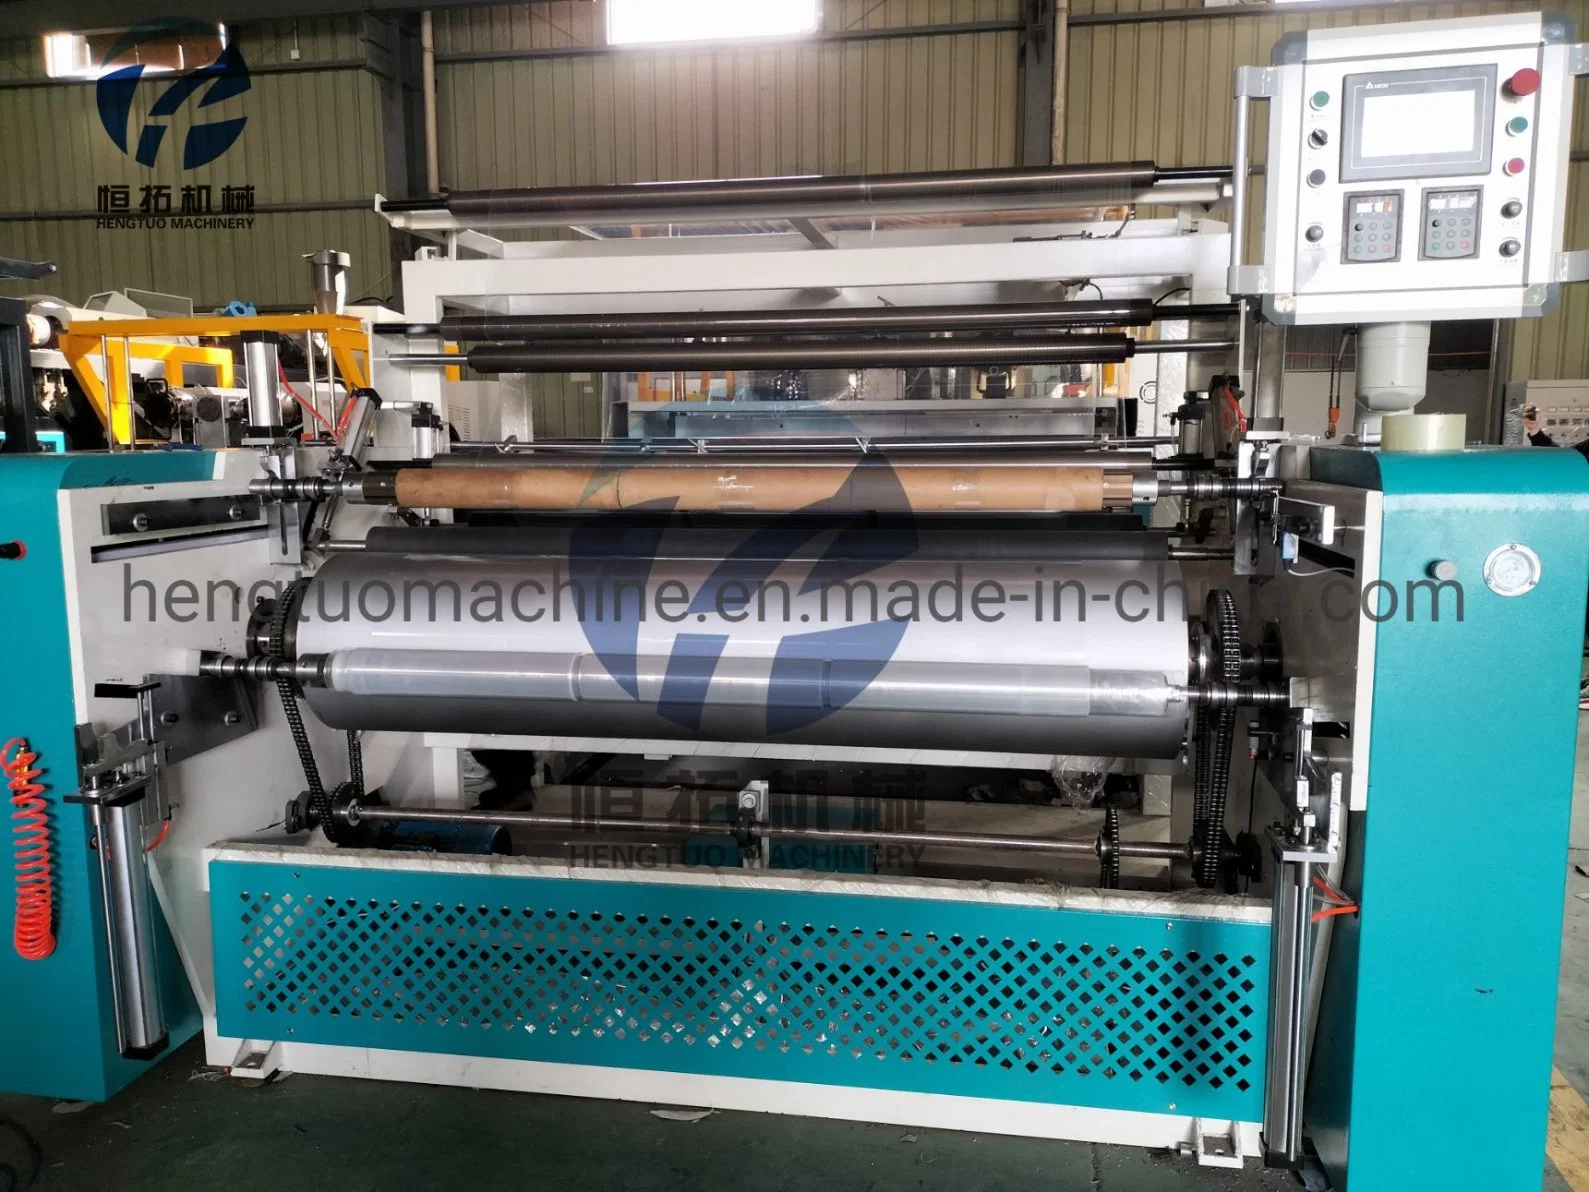 Hengtuo PE 1500mm 3 Layer Stretch Package Film Machine for Food Protective Film Plastic Tensile Membranes